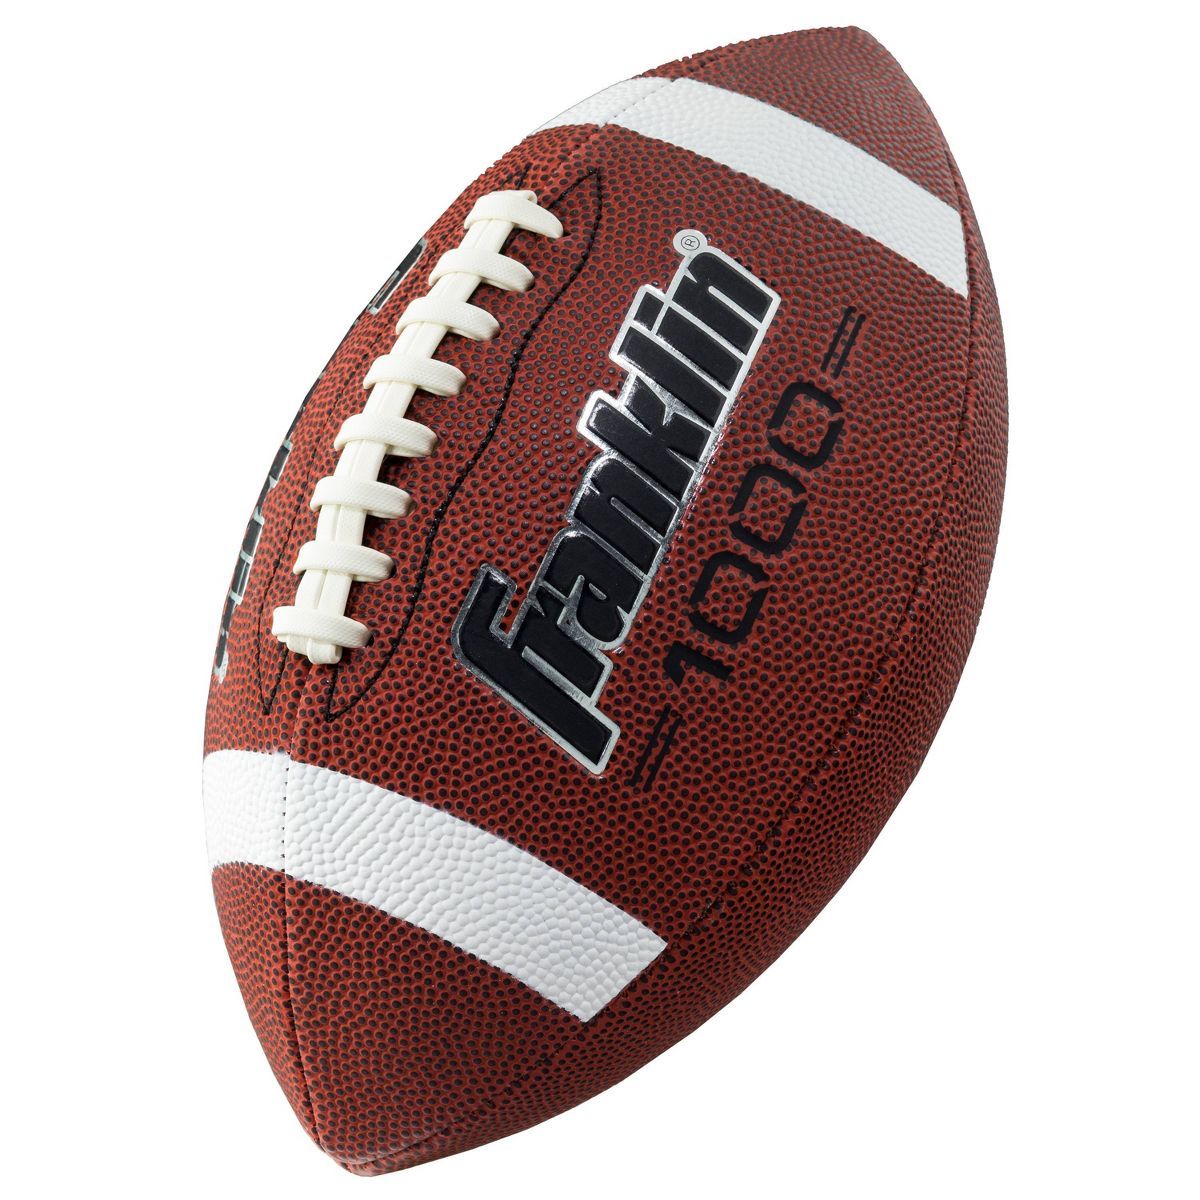 Franklin Sports 1000 Series Grip-Rite Official Football - Brown | Target